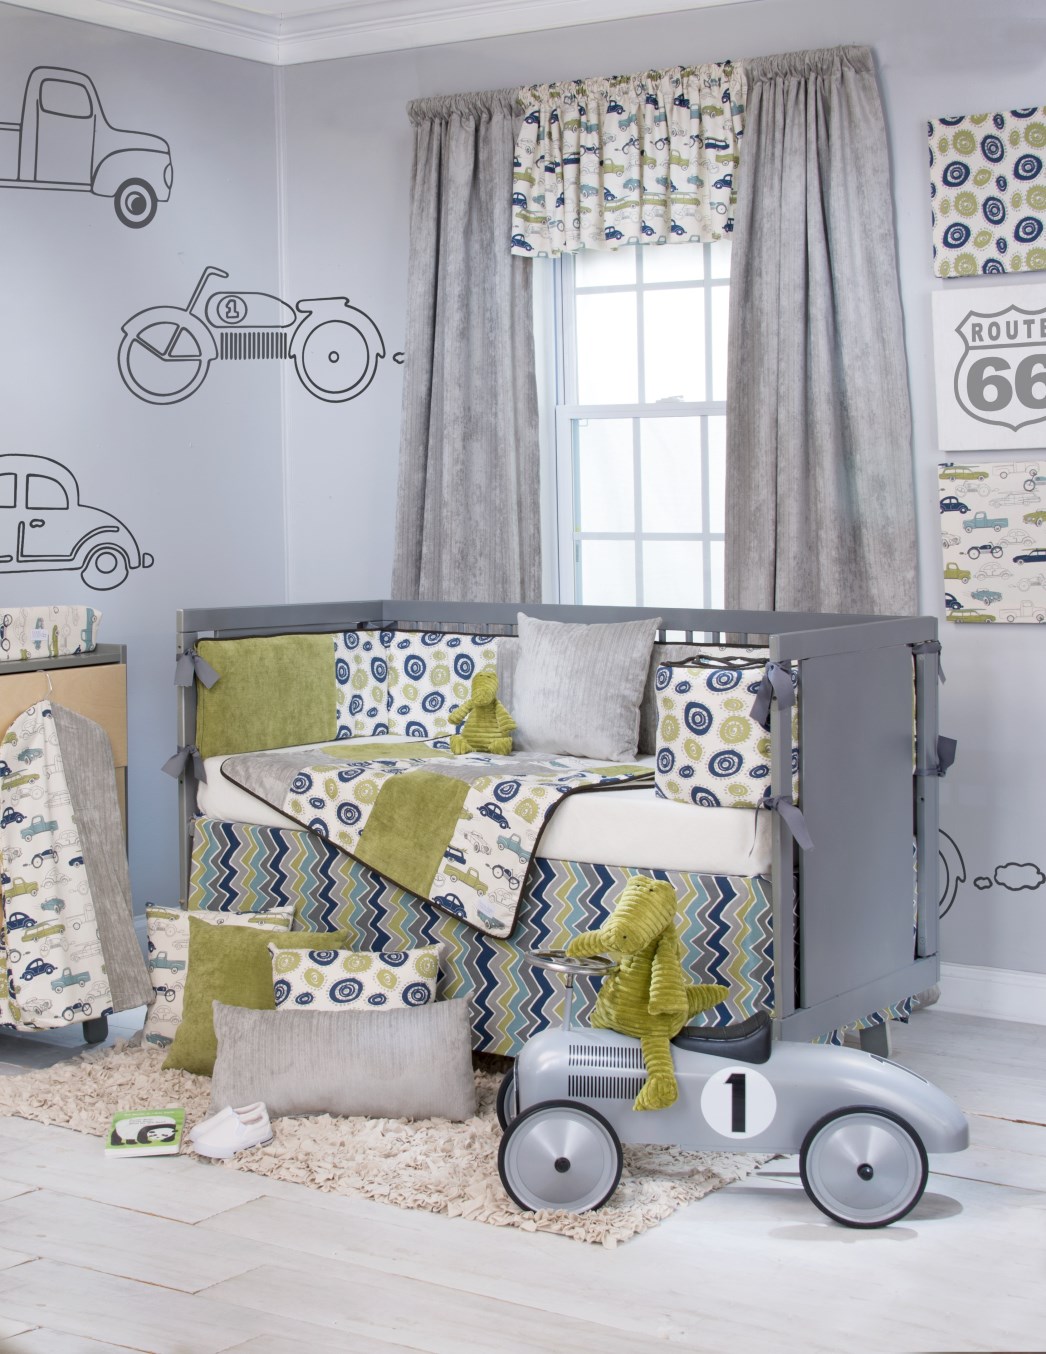 Grey And Baby Neutral Grey And Green Themed Baby Boy Crib Bedding To Match The Grey Themed Baby Boy Themed Wall Kids Room Enchanting Baby Boy Crib Bedding Applied In Colorful Baby Room